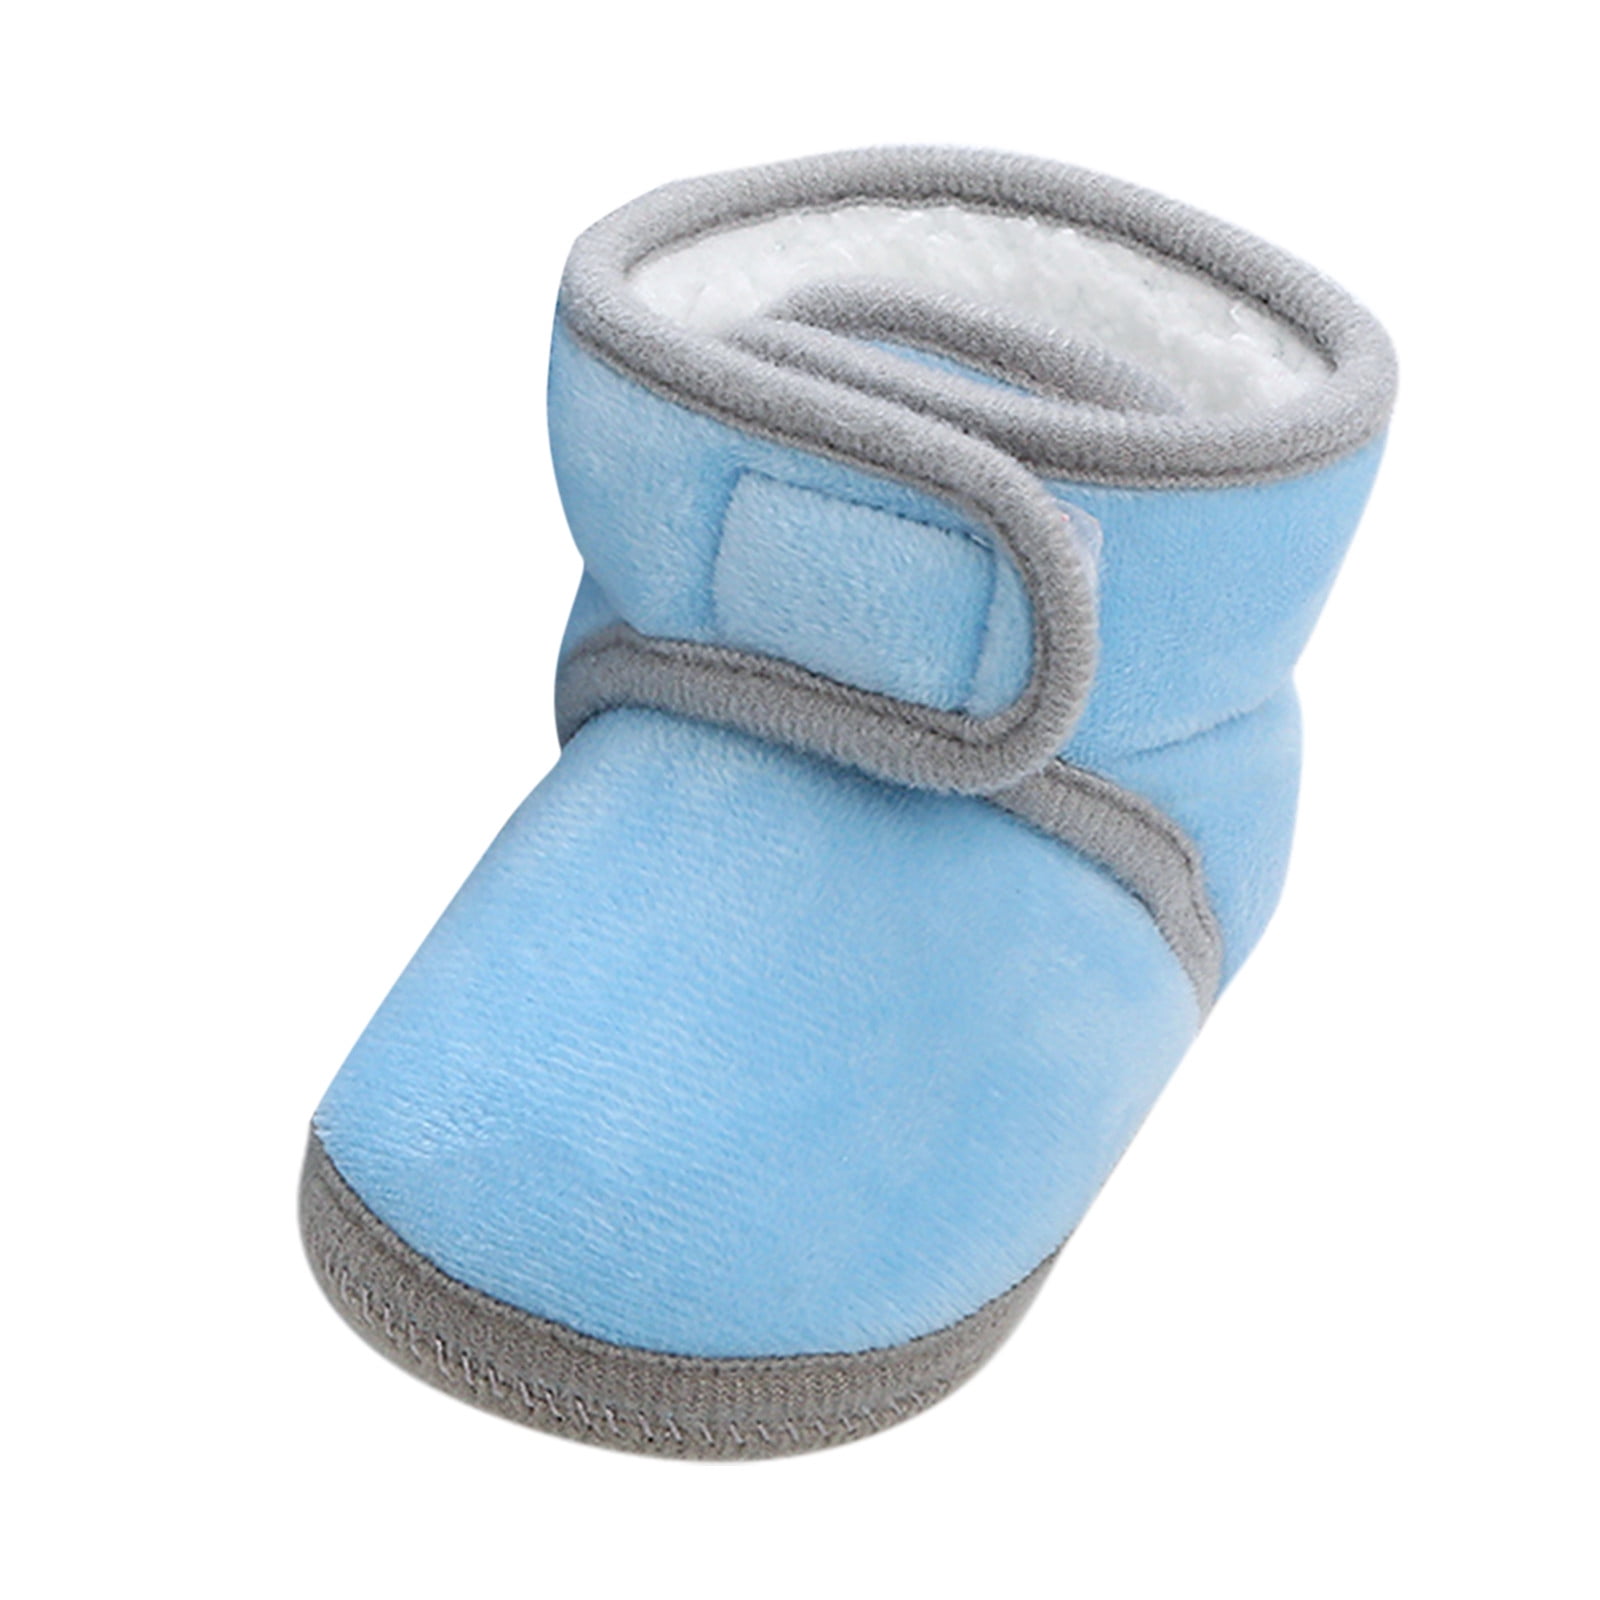 Booties For 1 Year Old Online | bellvalefarms.com